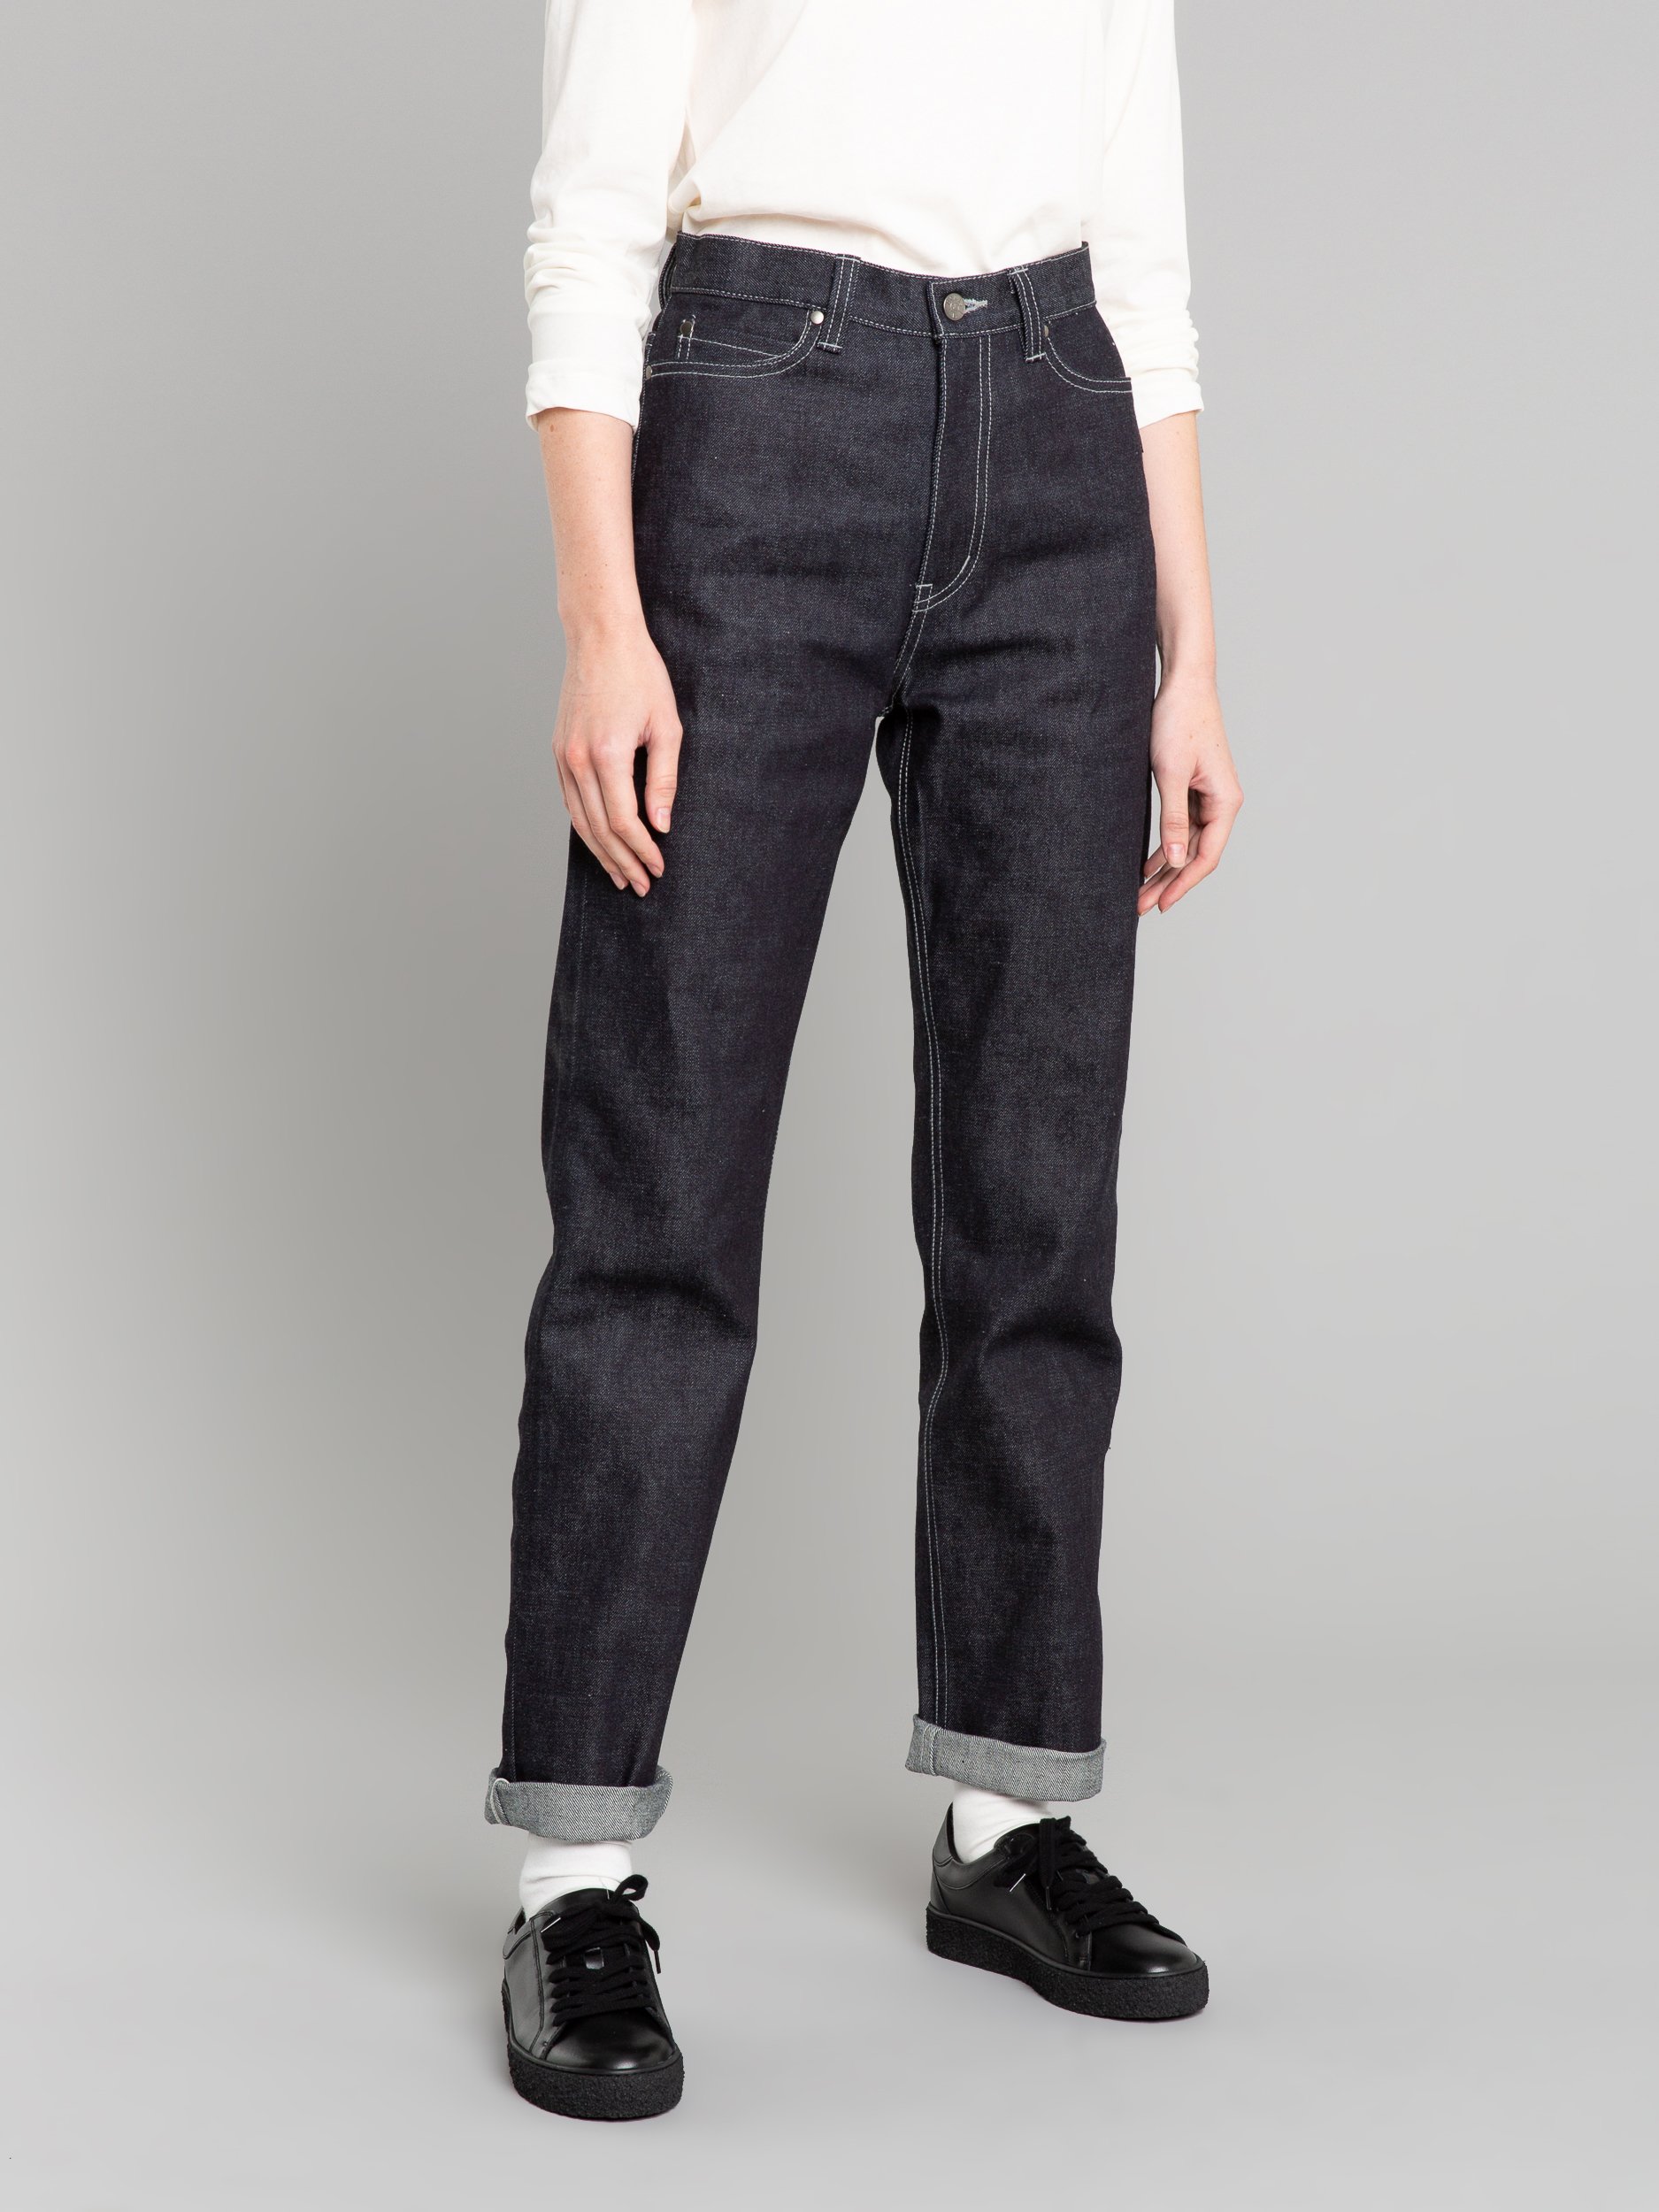 black #2 regular jeans with off white stitching